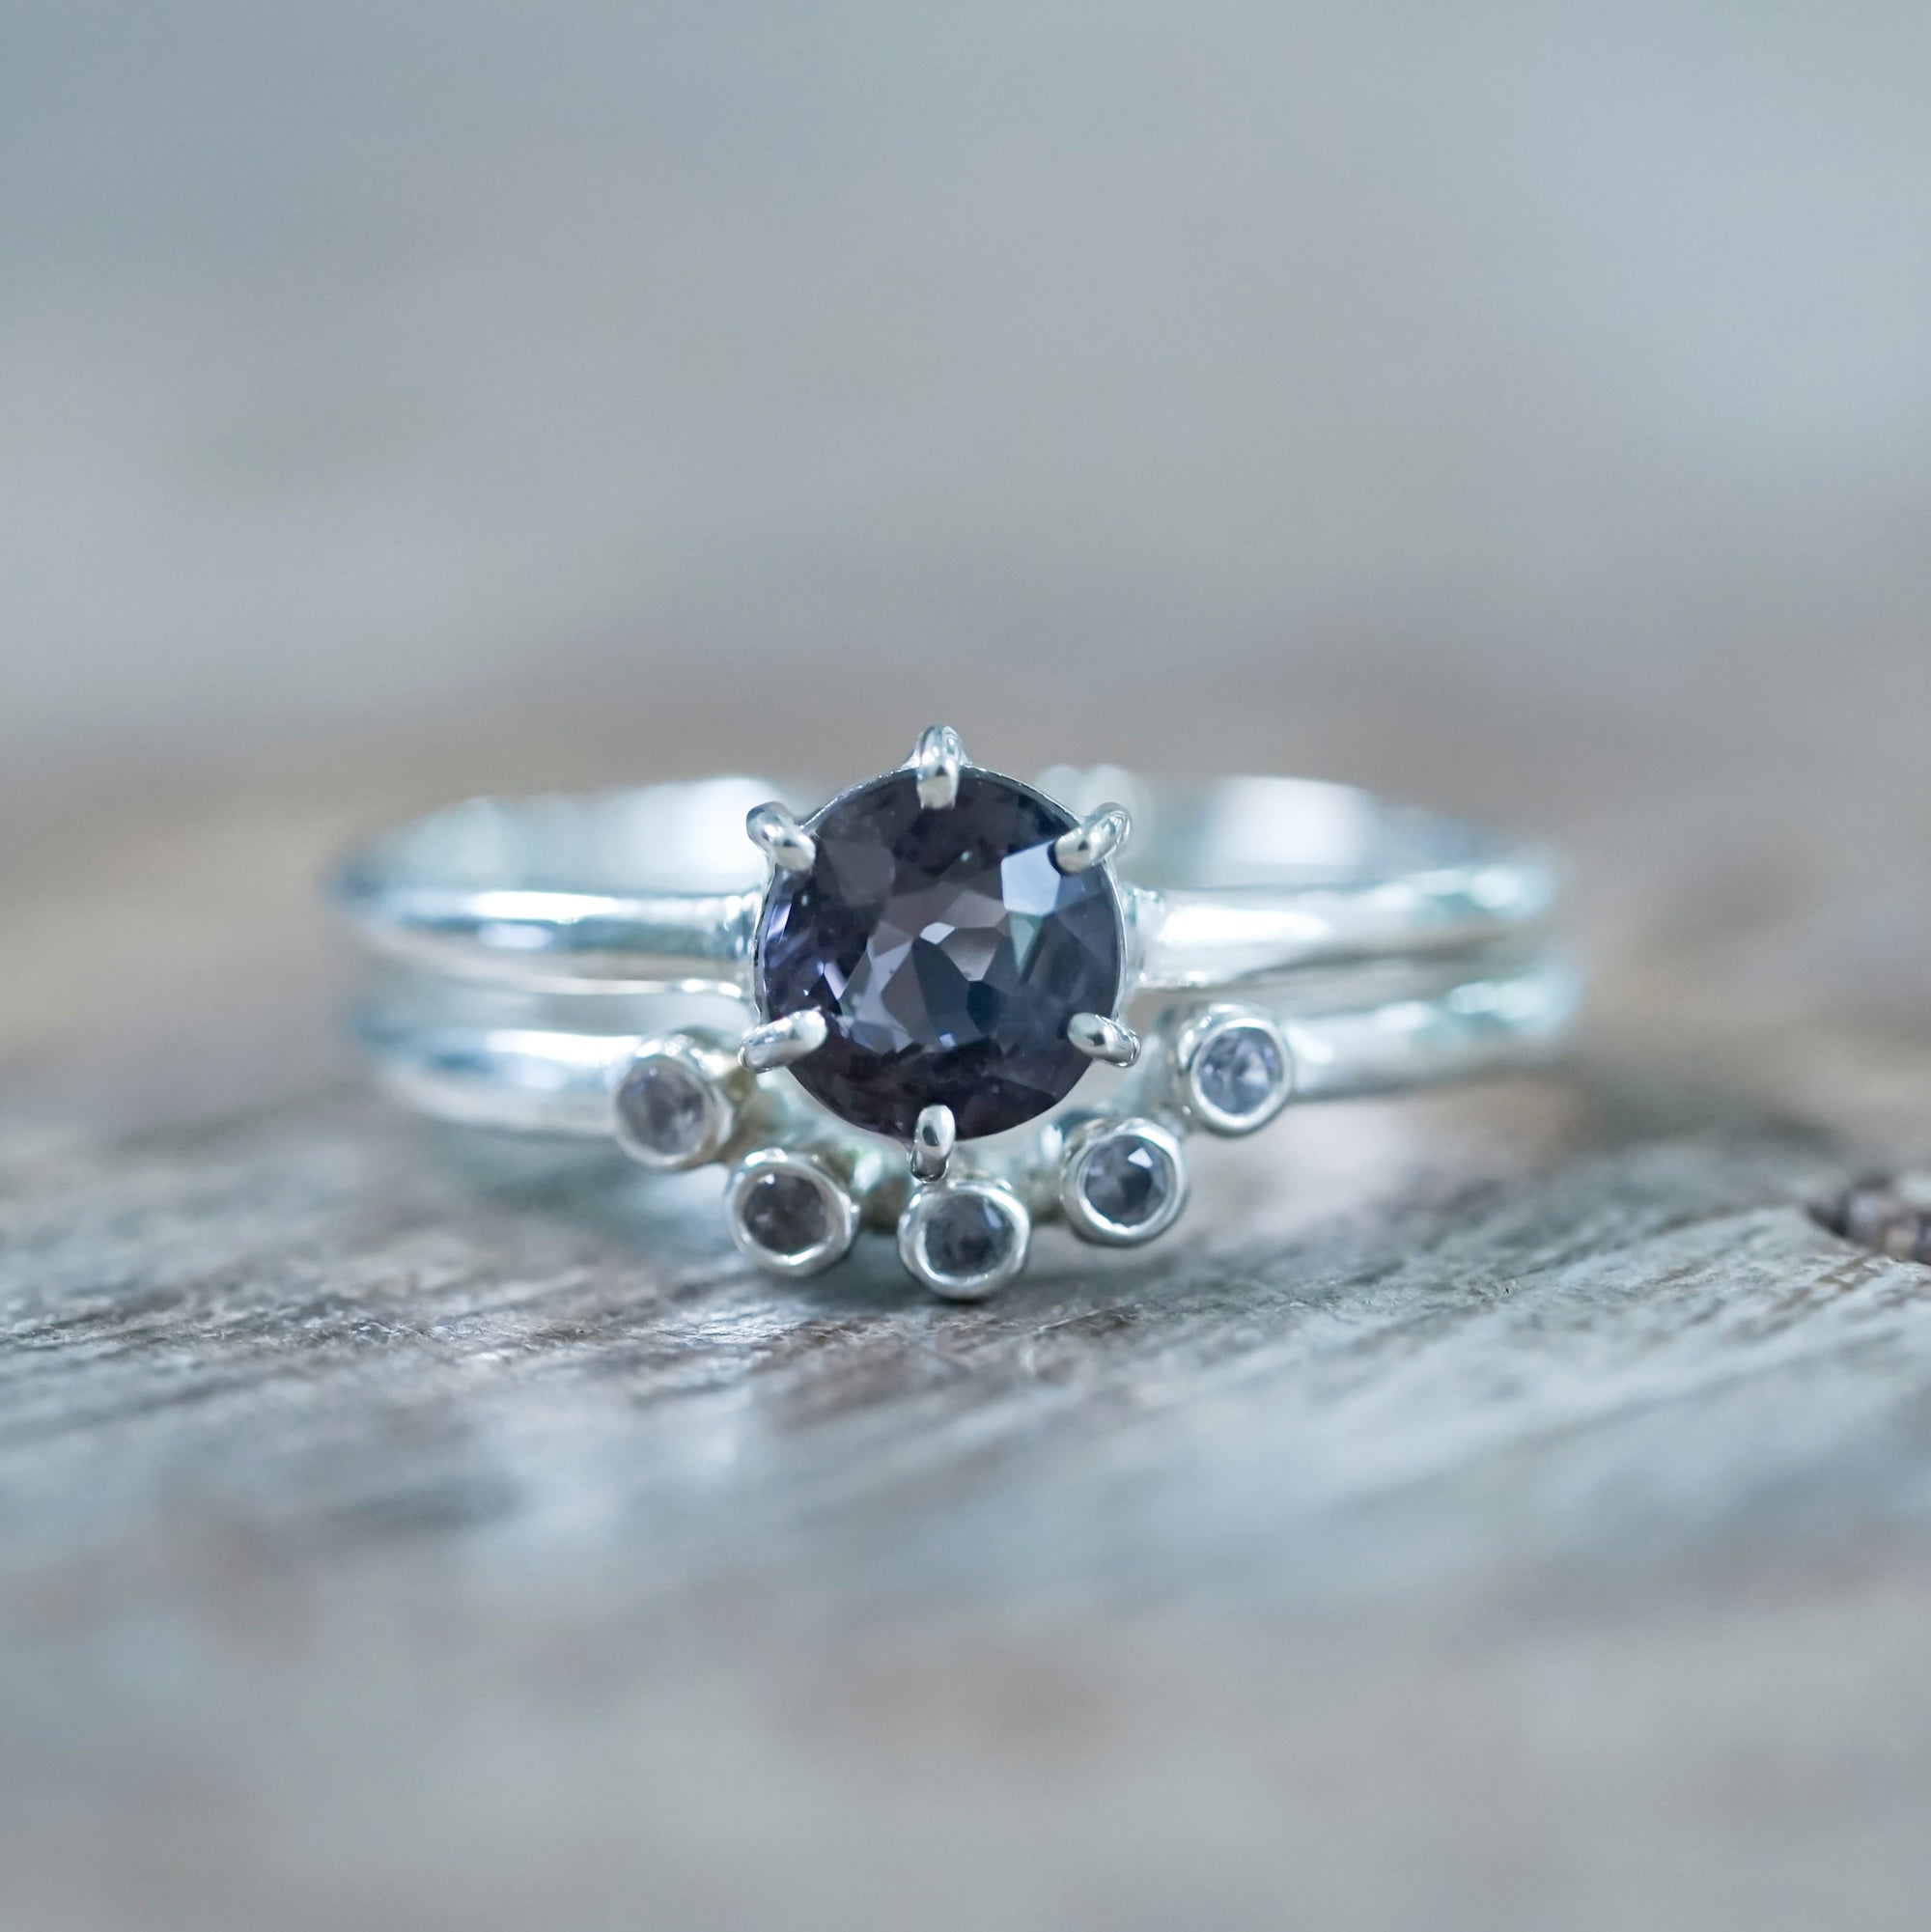 Purple Spinel Ring Set  - Gardens of the Sun | Ethical Jewelry